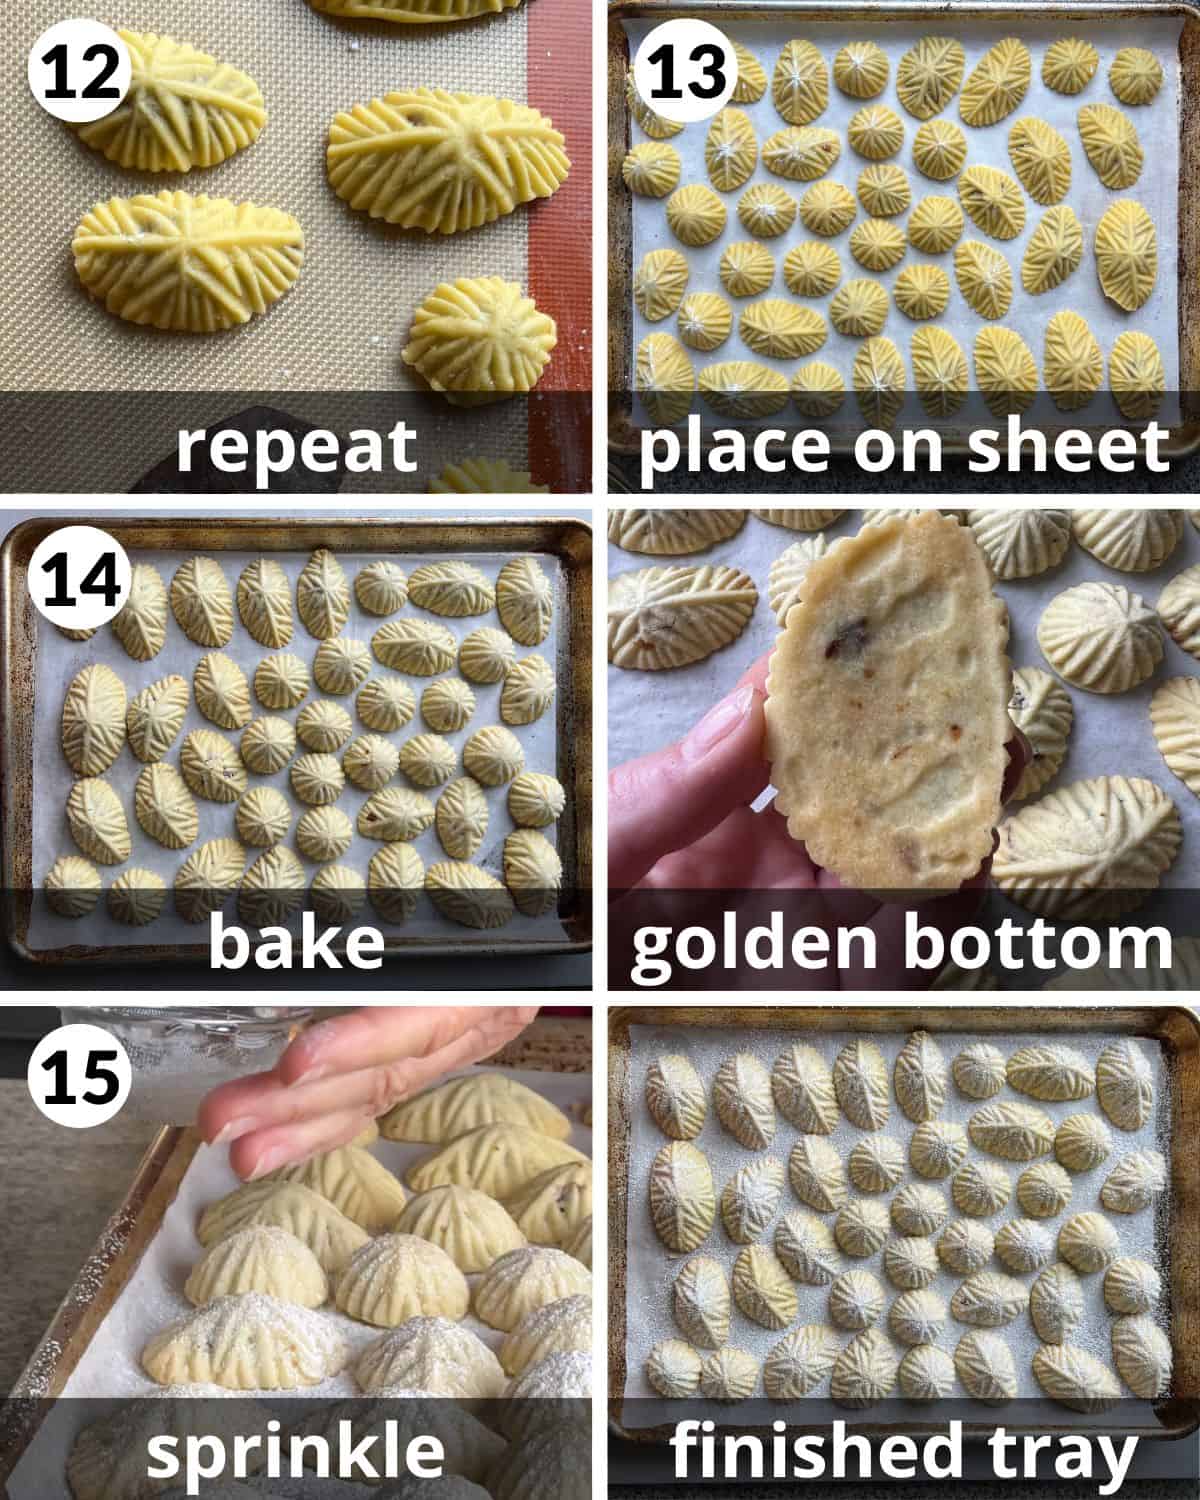 A 6 photo collage showing the final assembly of maamoul cookies. 